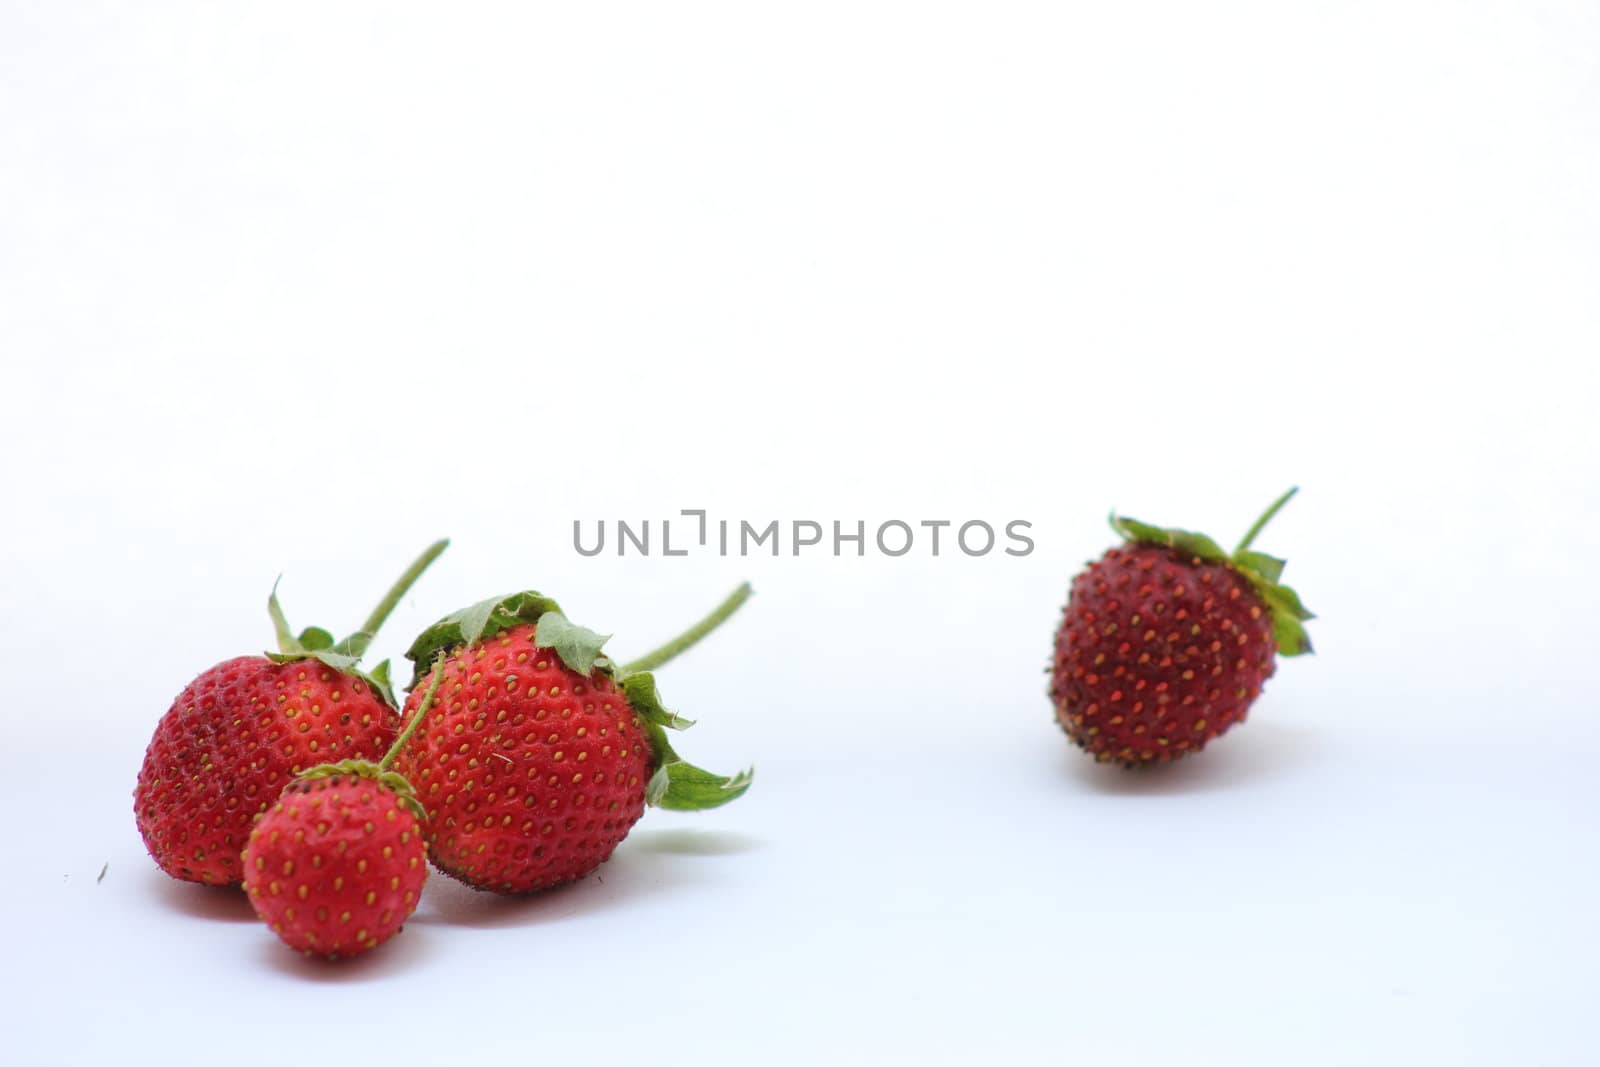 Strawberries grouped together with one left behind.